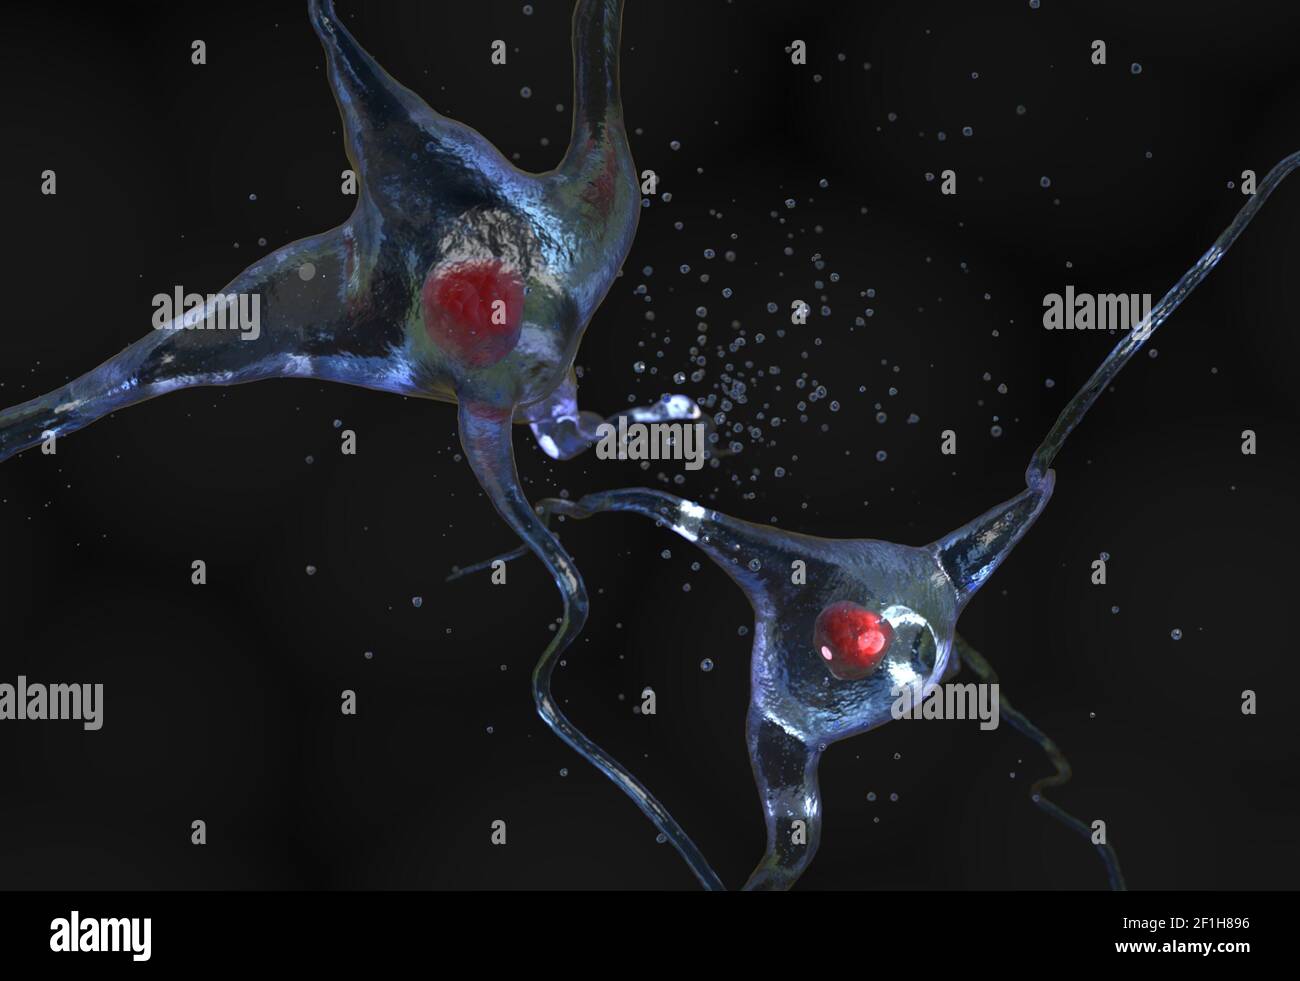 Nerve cell with nucleus 3d illustration Stock Photo